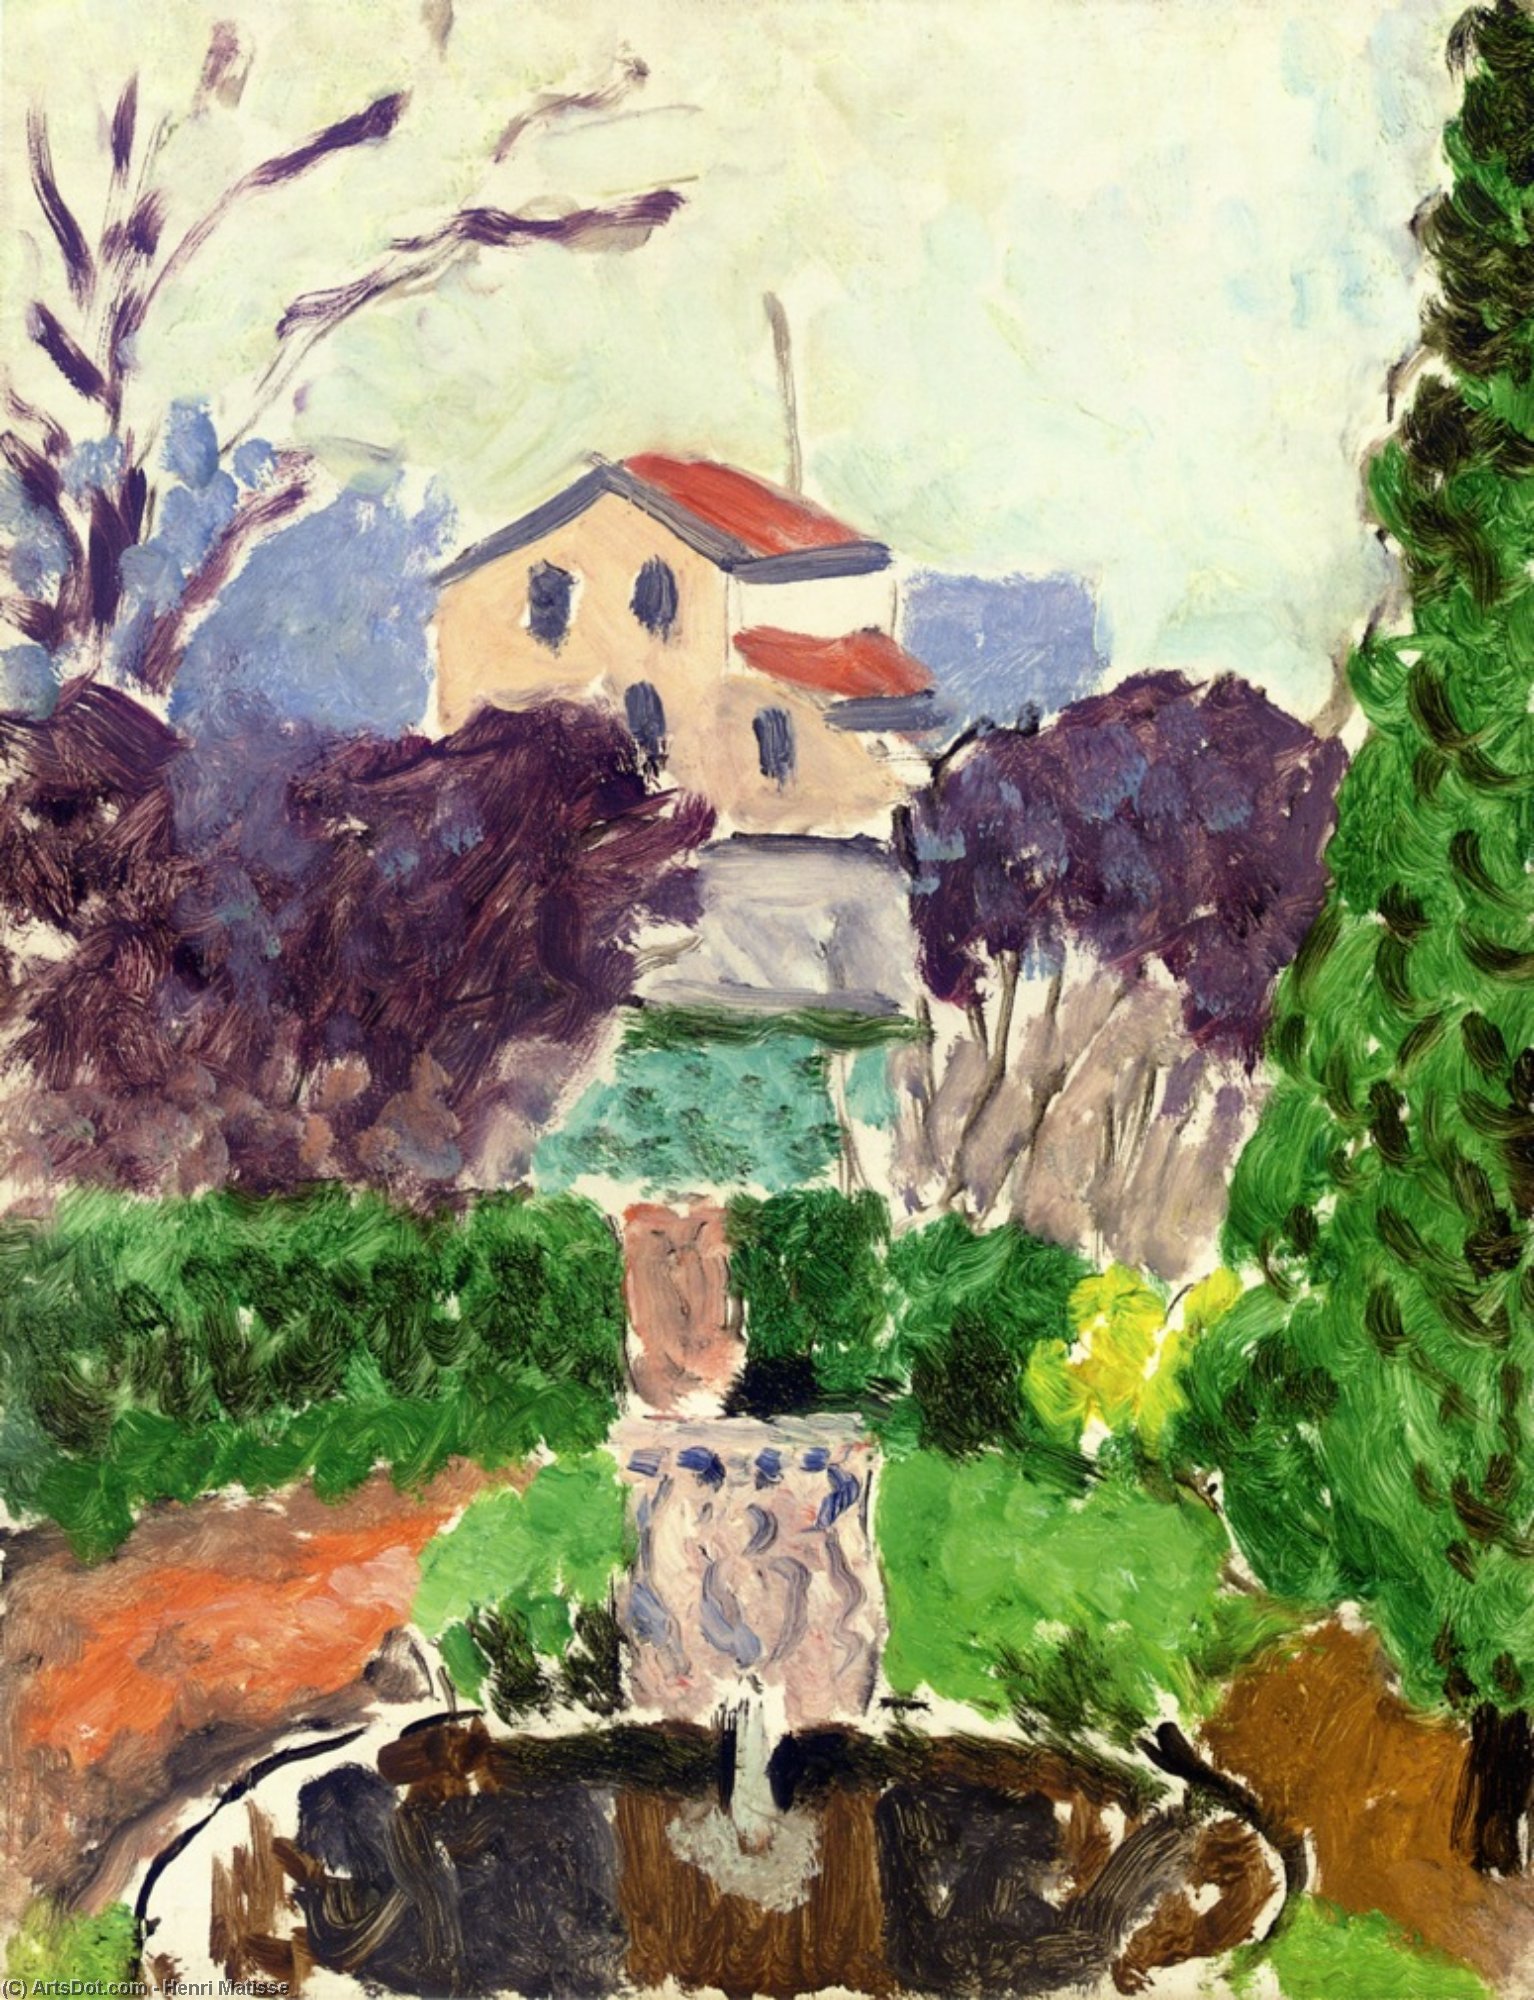 Order Oil Painting Replica The Artist`s Garden at Issy les Moulineaux, 1918 by Henri Matisse (Inspired By) (1869-1954, France) | ArtsDot.com